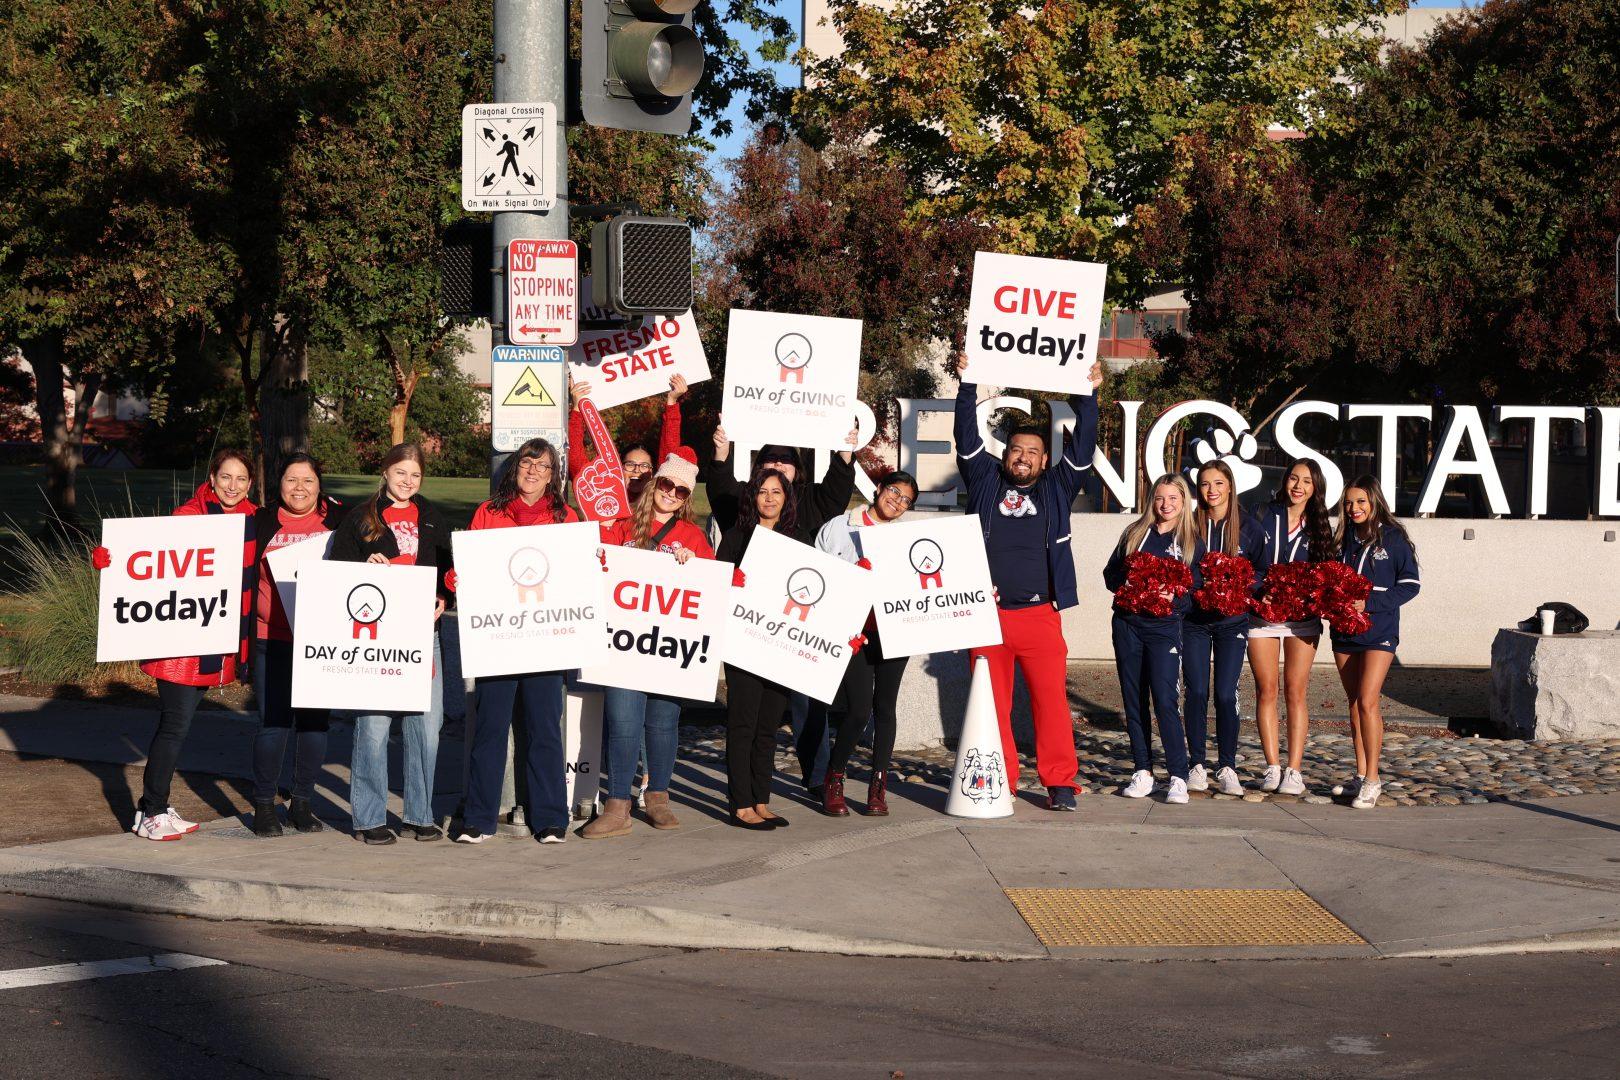 Community members joined together for the Day of Giving rally on Shaw and Maple avenues. (Marcos Acosta/The Collegian)